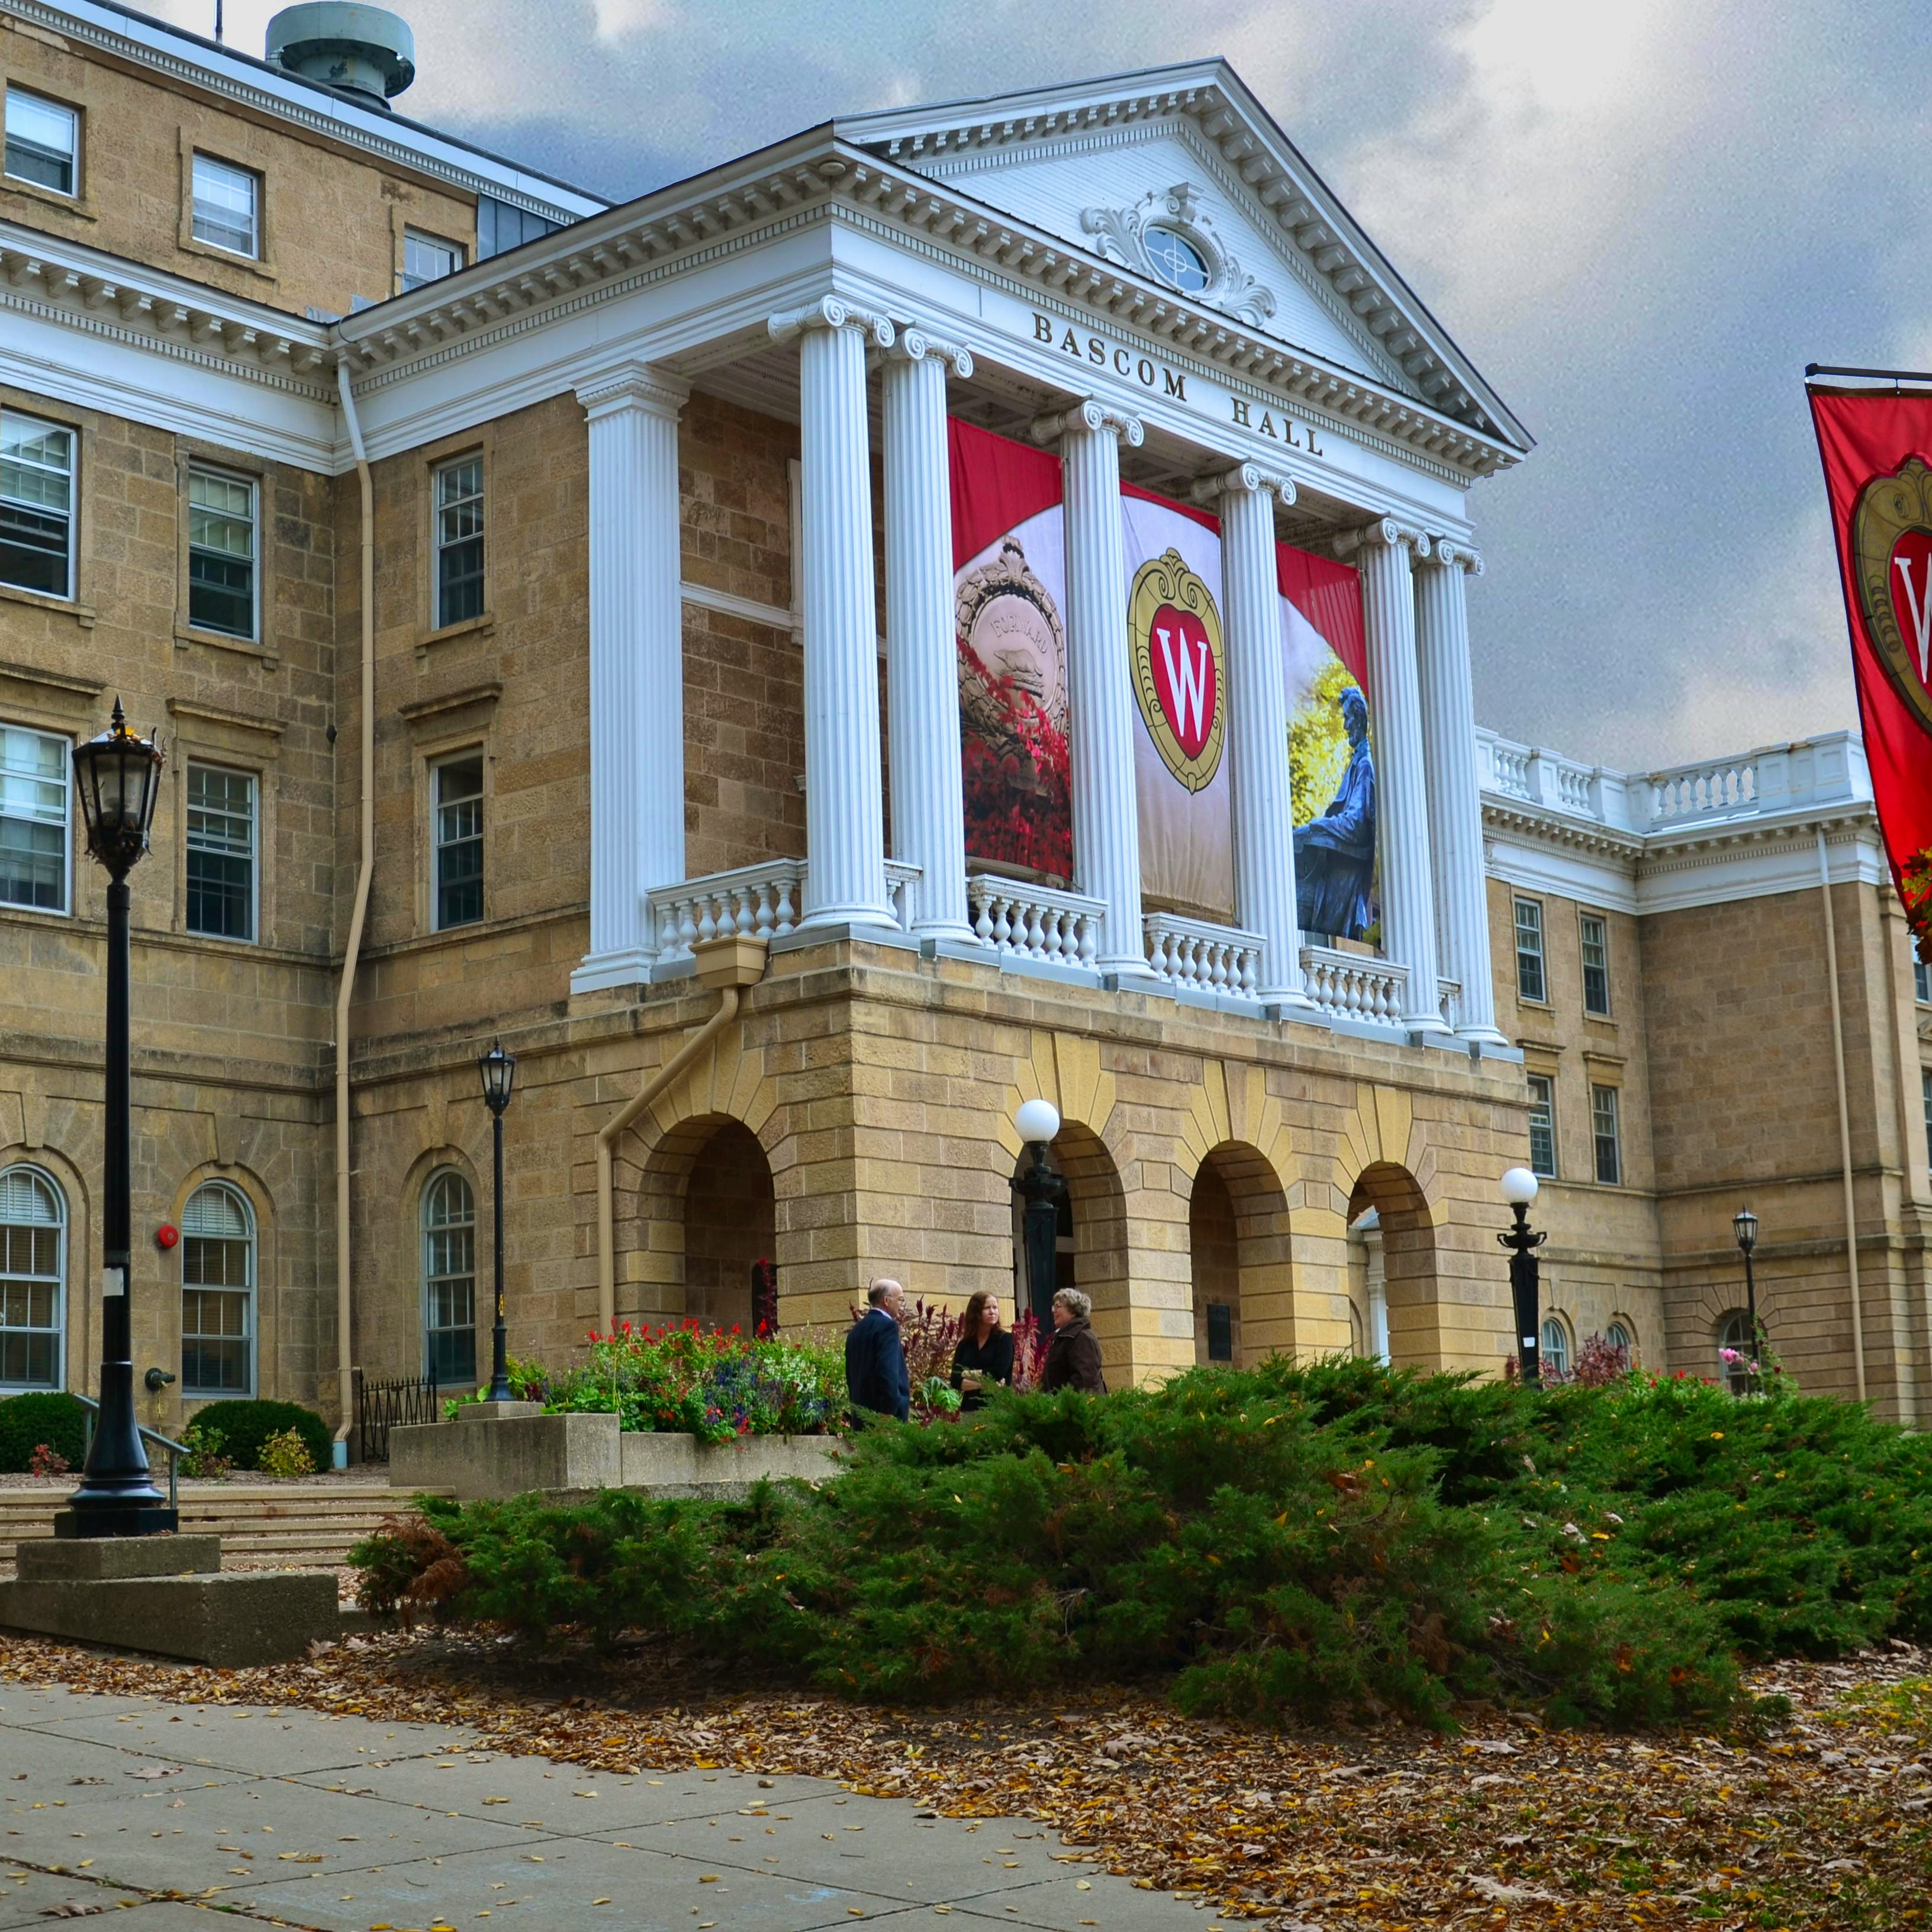 The Best Colleges in Wisconsin for 2021